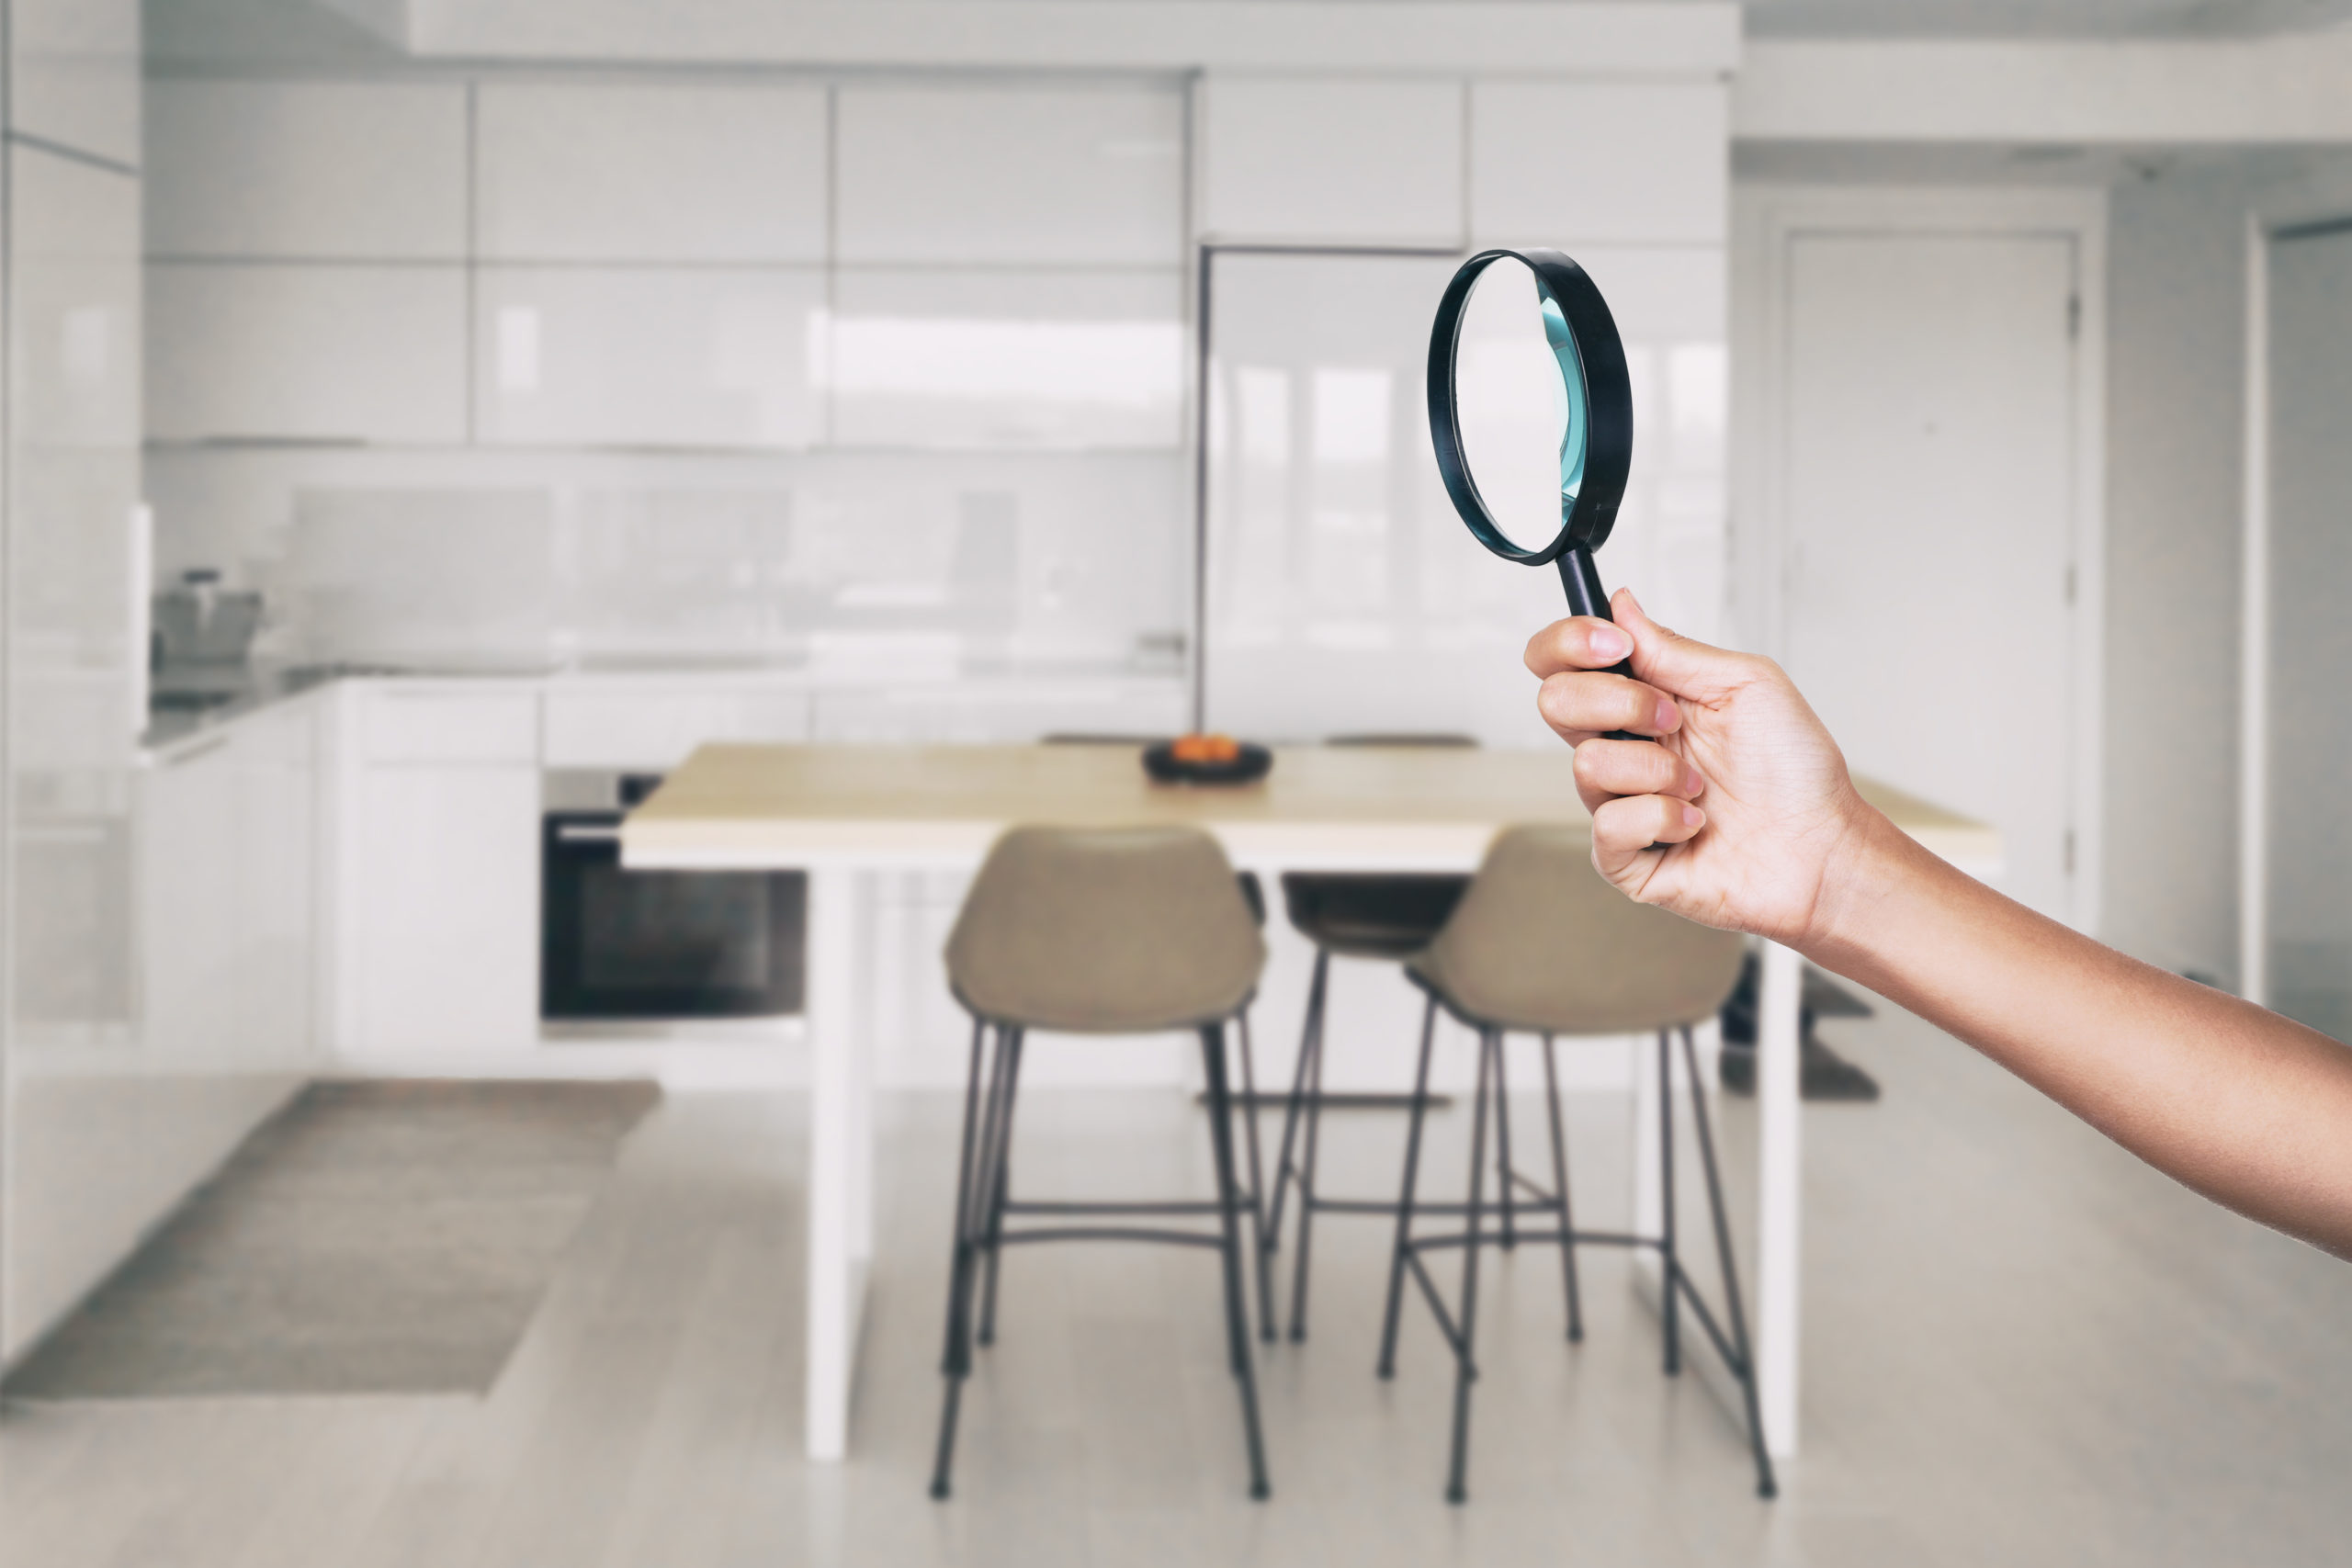 Home inspection - magnifying glass inspector looking at kitchen house background.